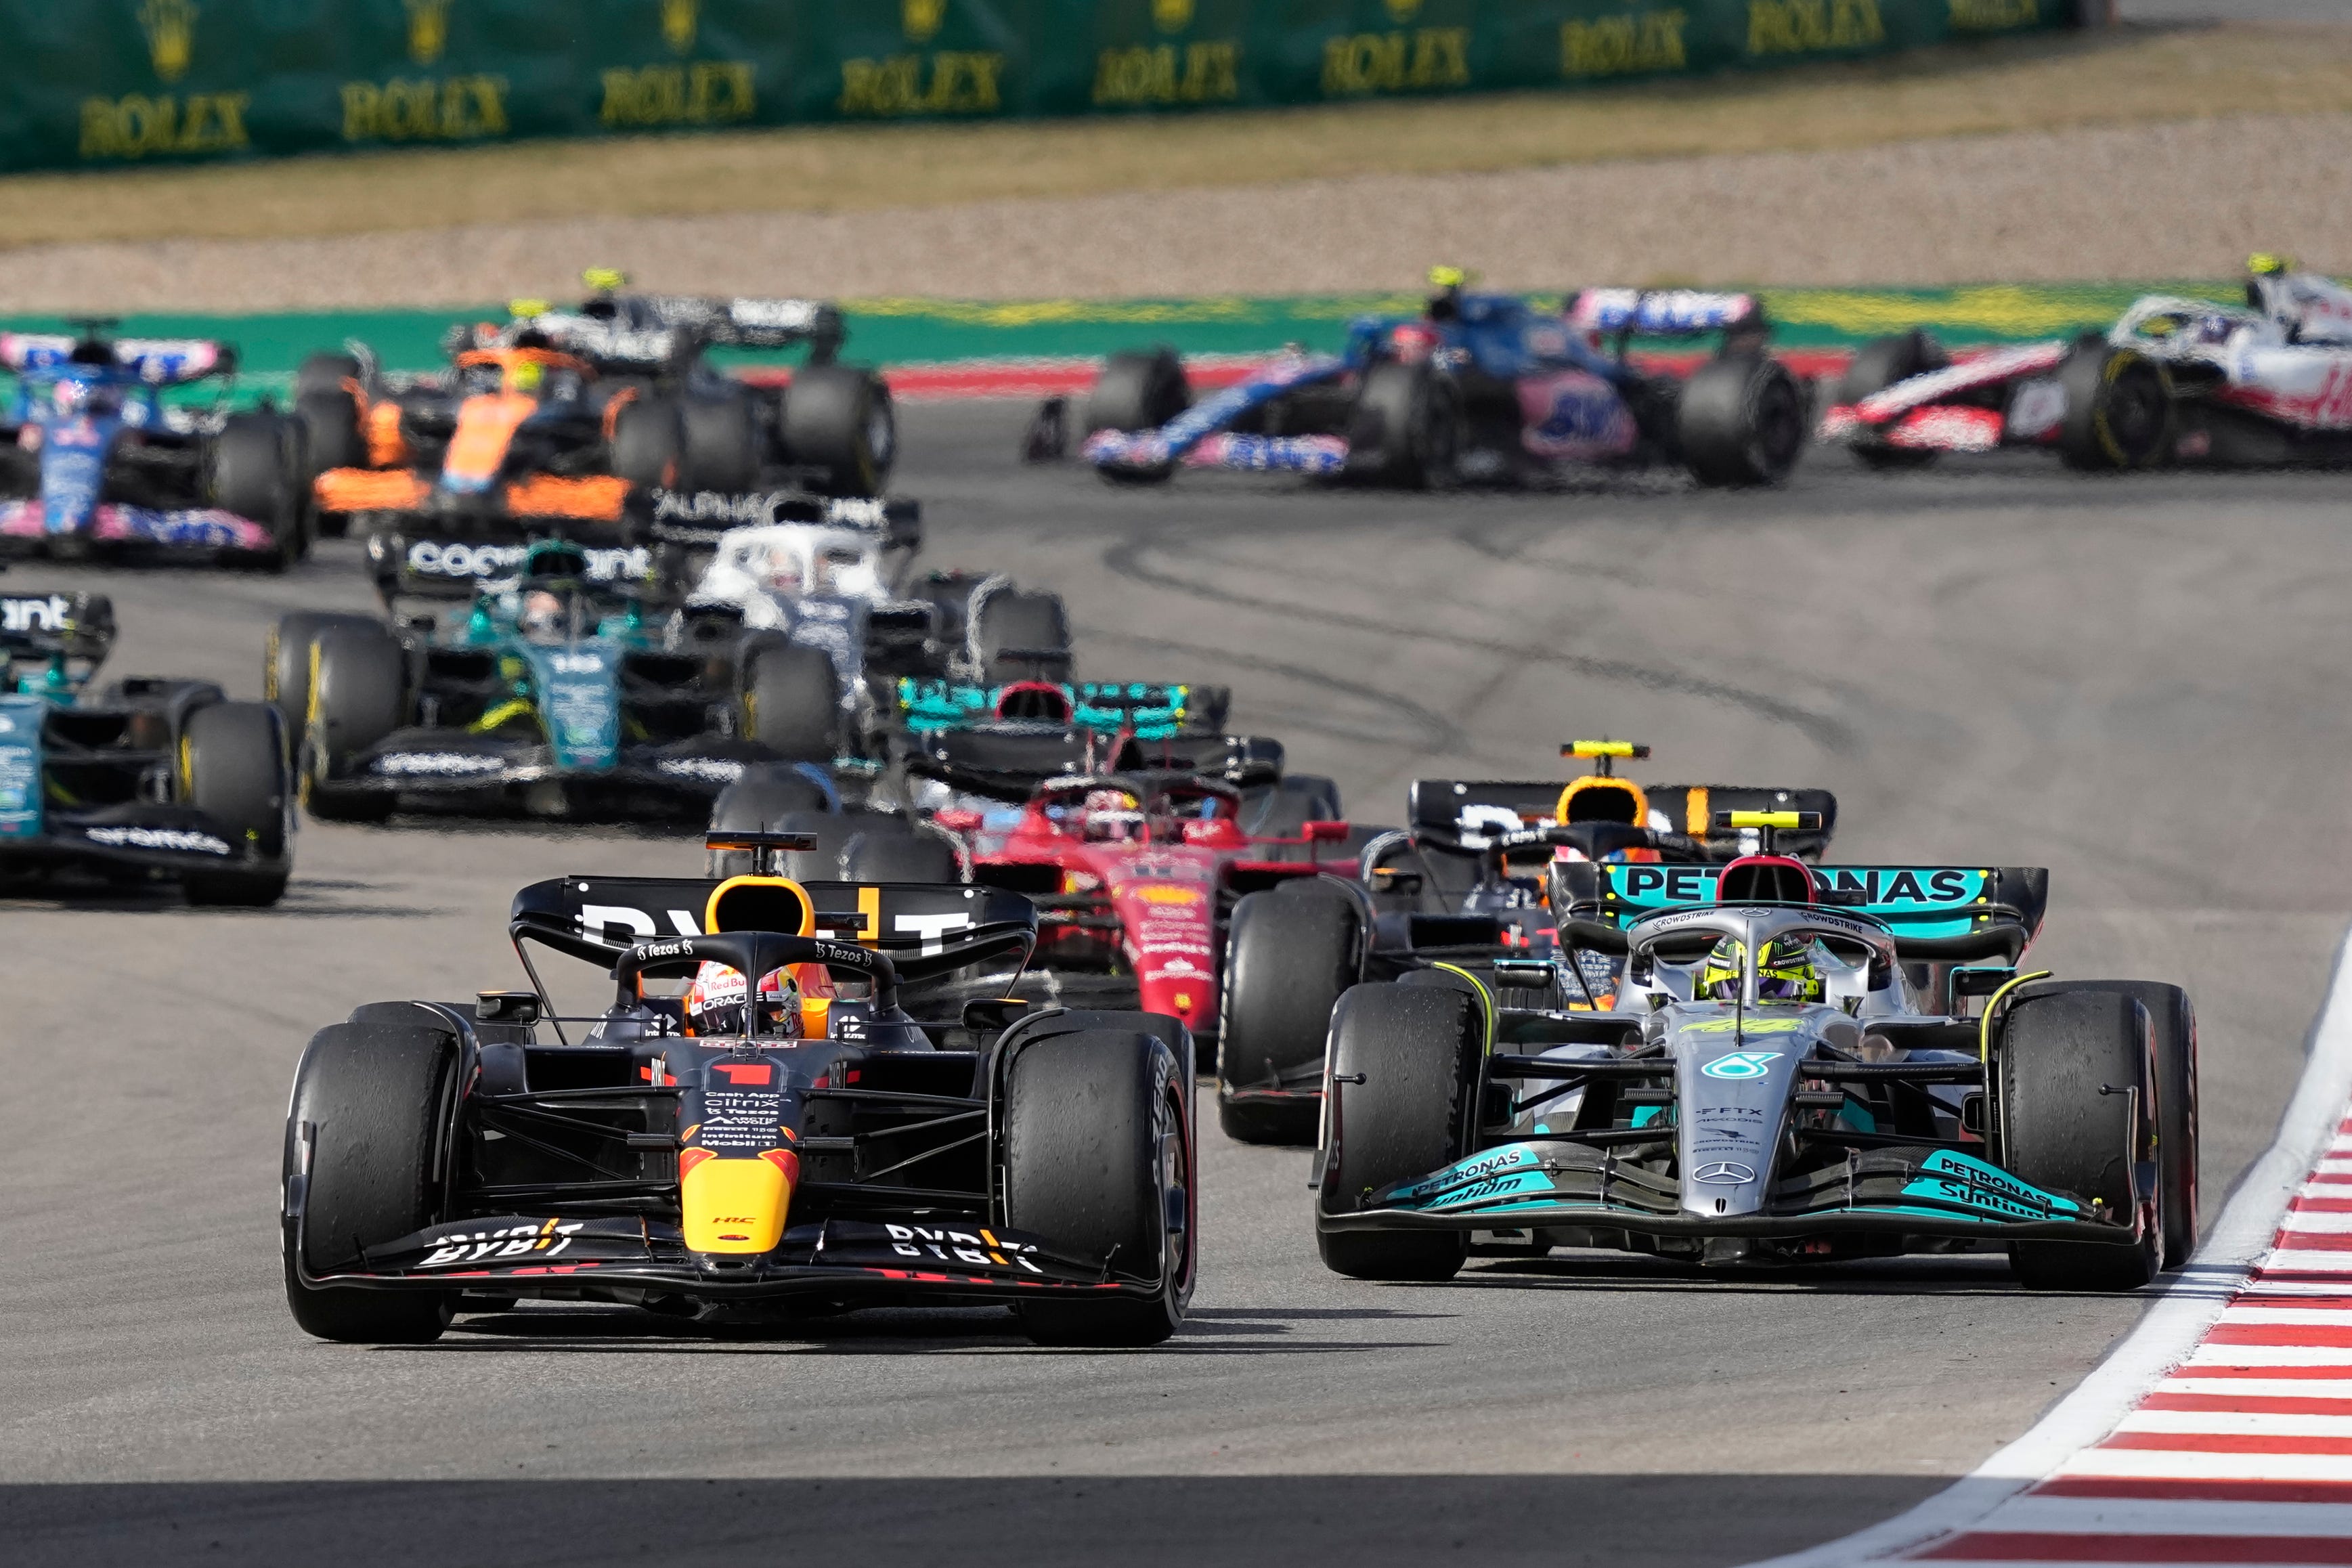 Verstappen (left) overtook Hamilton (right) six laps from the end to win on Sunday